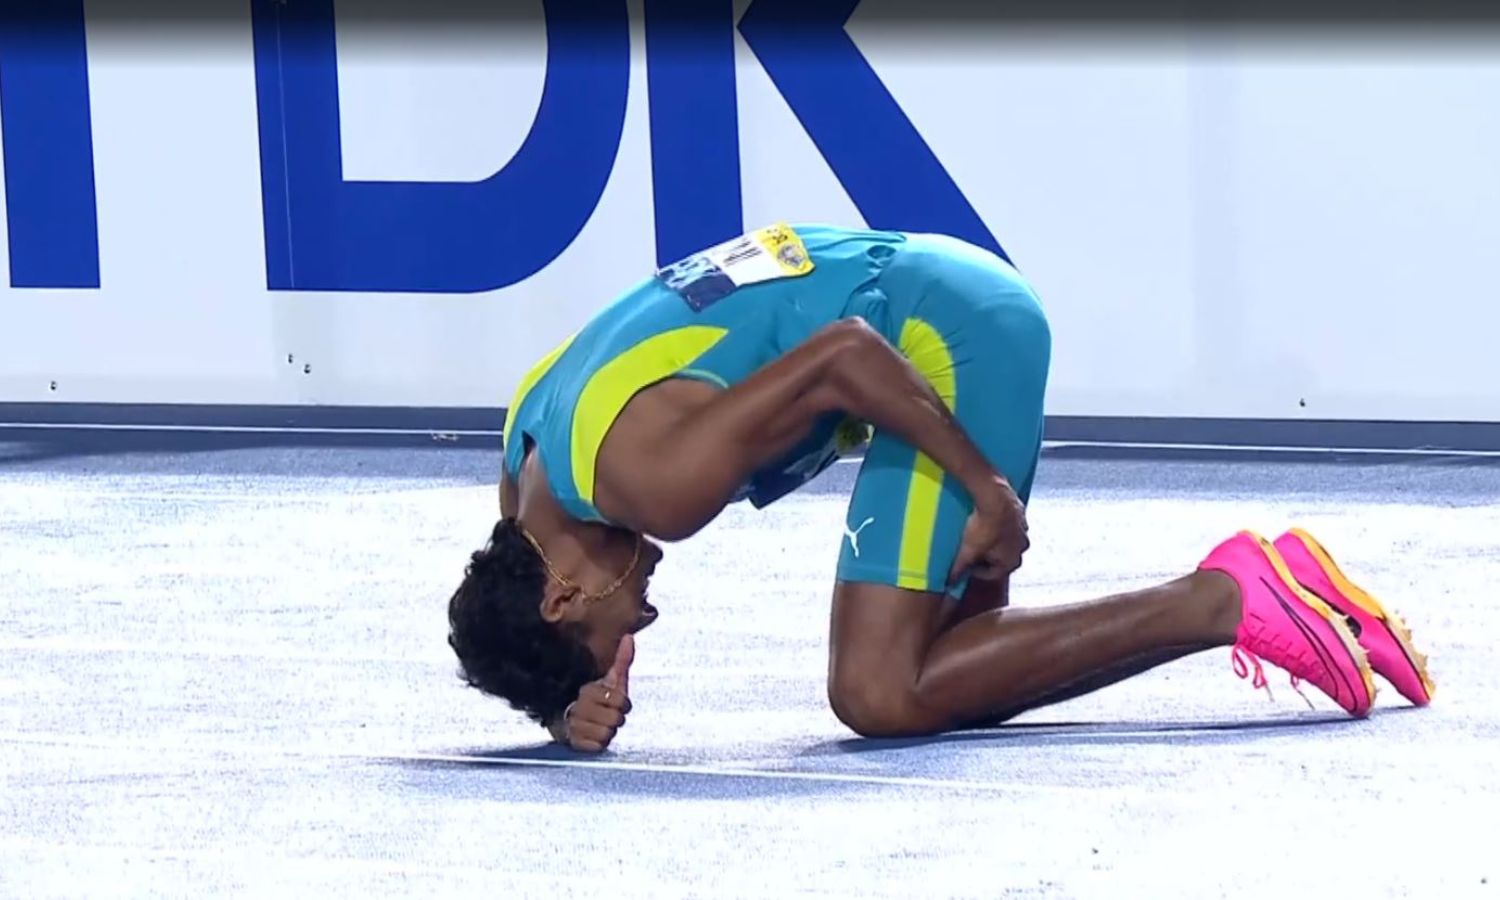 Rajesh Ramesh limped at World Relays, why do athletes suffer from cramps?